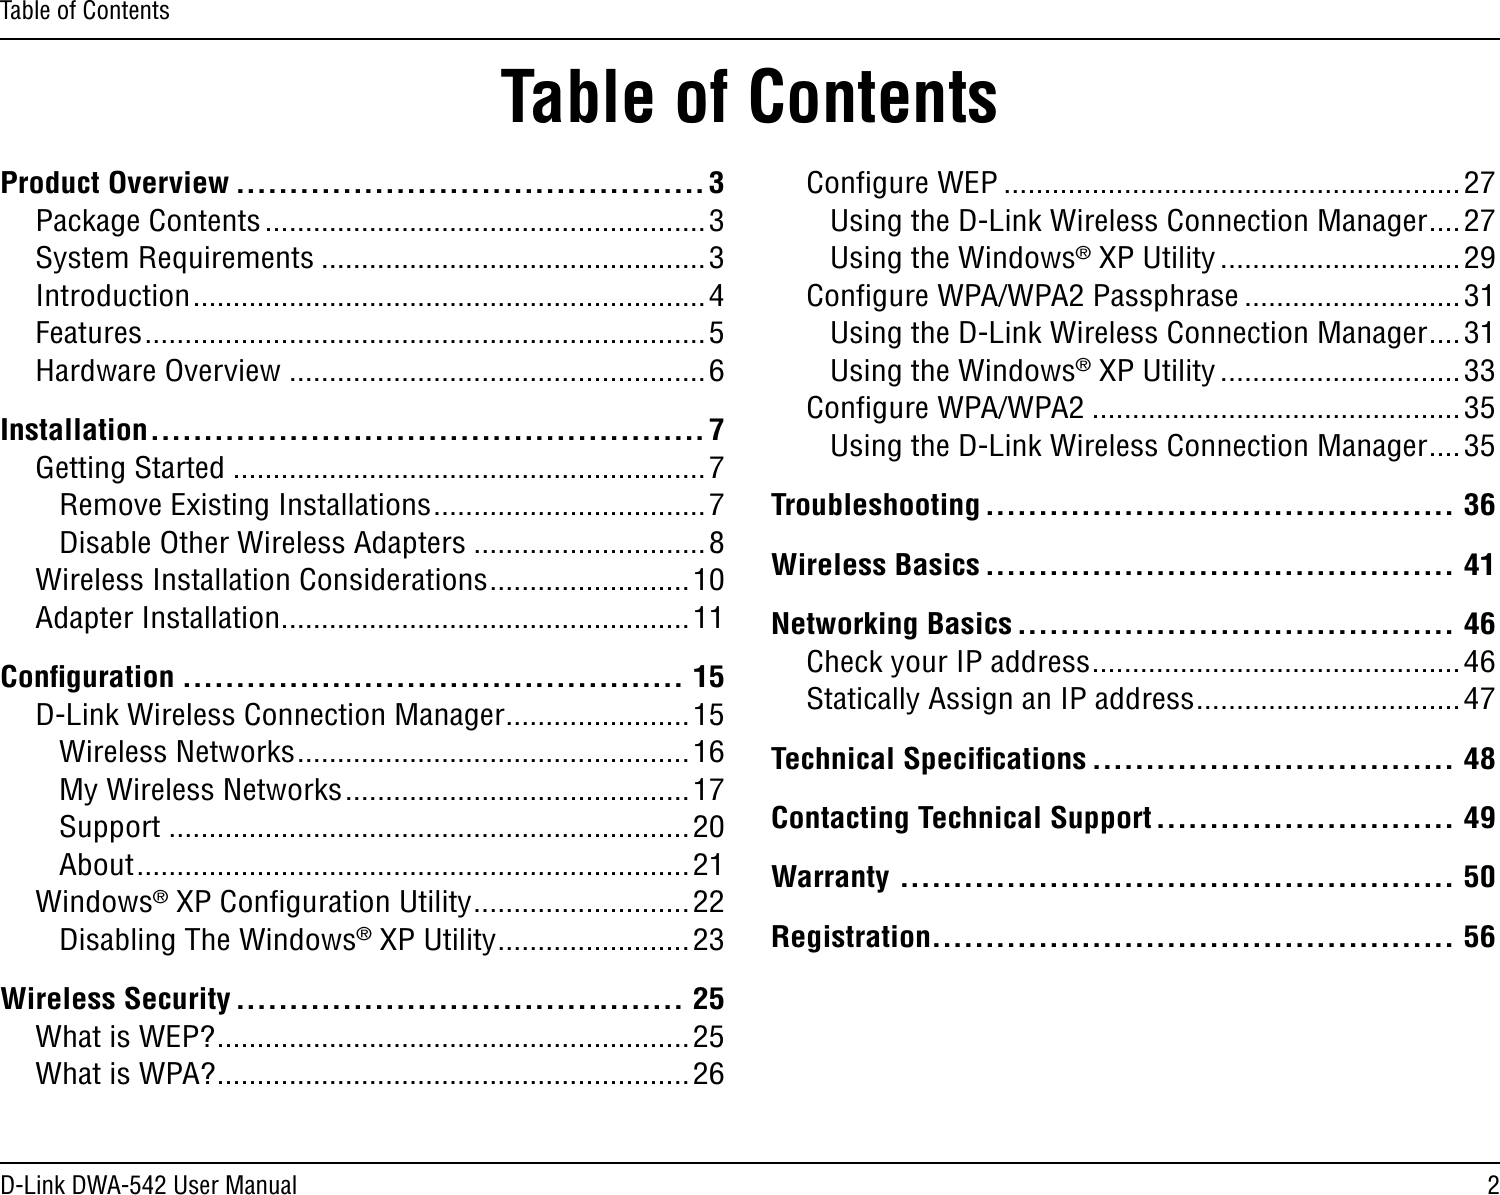 2D-Link DWA-542 User ManualTable of ContentsProduct Overview ............................................3Package Contents .......................................................3System Requirements ................................................3Introduction ................................................................4Features ......................................................................5Hardware Overview ....................................................6Installation ....................................................7Getting Started ...........................................................7Remove Existing Installations ..................................7Disable Other Wireless Adapters .............................8Wireless Installation Considerations .........................10Adapter Installation ...................................................11Conﬁguration ............................................... 15D-Link Wireless Connection Manager .......................15Wireless Networks .................................................16My Wireless Networks ...........................................17Support .................................................................20About .....................................................................21Windows® XP Conﬁguration Utility ...........................22Disabling The Windows® XP Utility ........................23Wireless Security .......................................... 25What is WEP? ...........................................................25What is WPA? ...........................................................26Conﬁgure WEP .........................................................27Using the D-Link Wireless Connection Manager ....27Using the Windows® XP Utility ..............................29Conﬁgure WPA/WPA2 Passphrase ...........................31Using the D-Link Wireless Connection Manager ....31Using the Windows® XP Utility ..............................33Conﬁgure WPA/WPA2 ..............................................35Using the D-Link Wireless Connection Manager ....35Troubleshooting ............................................ 36Wireless Basics ............................................ 41Networking Basics ......................................... 46Check your IP address ..............................................46Statically Assign an IP address .................................47Technical Speciﬁcations .................................. 48Contacting Technical Support ............................ 49Warranty .................................................... 50Registration................................................. 56Table of Contents